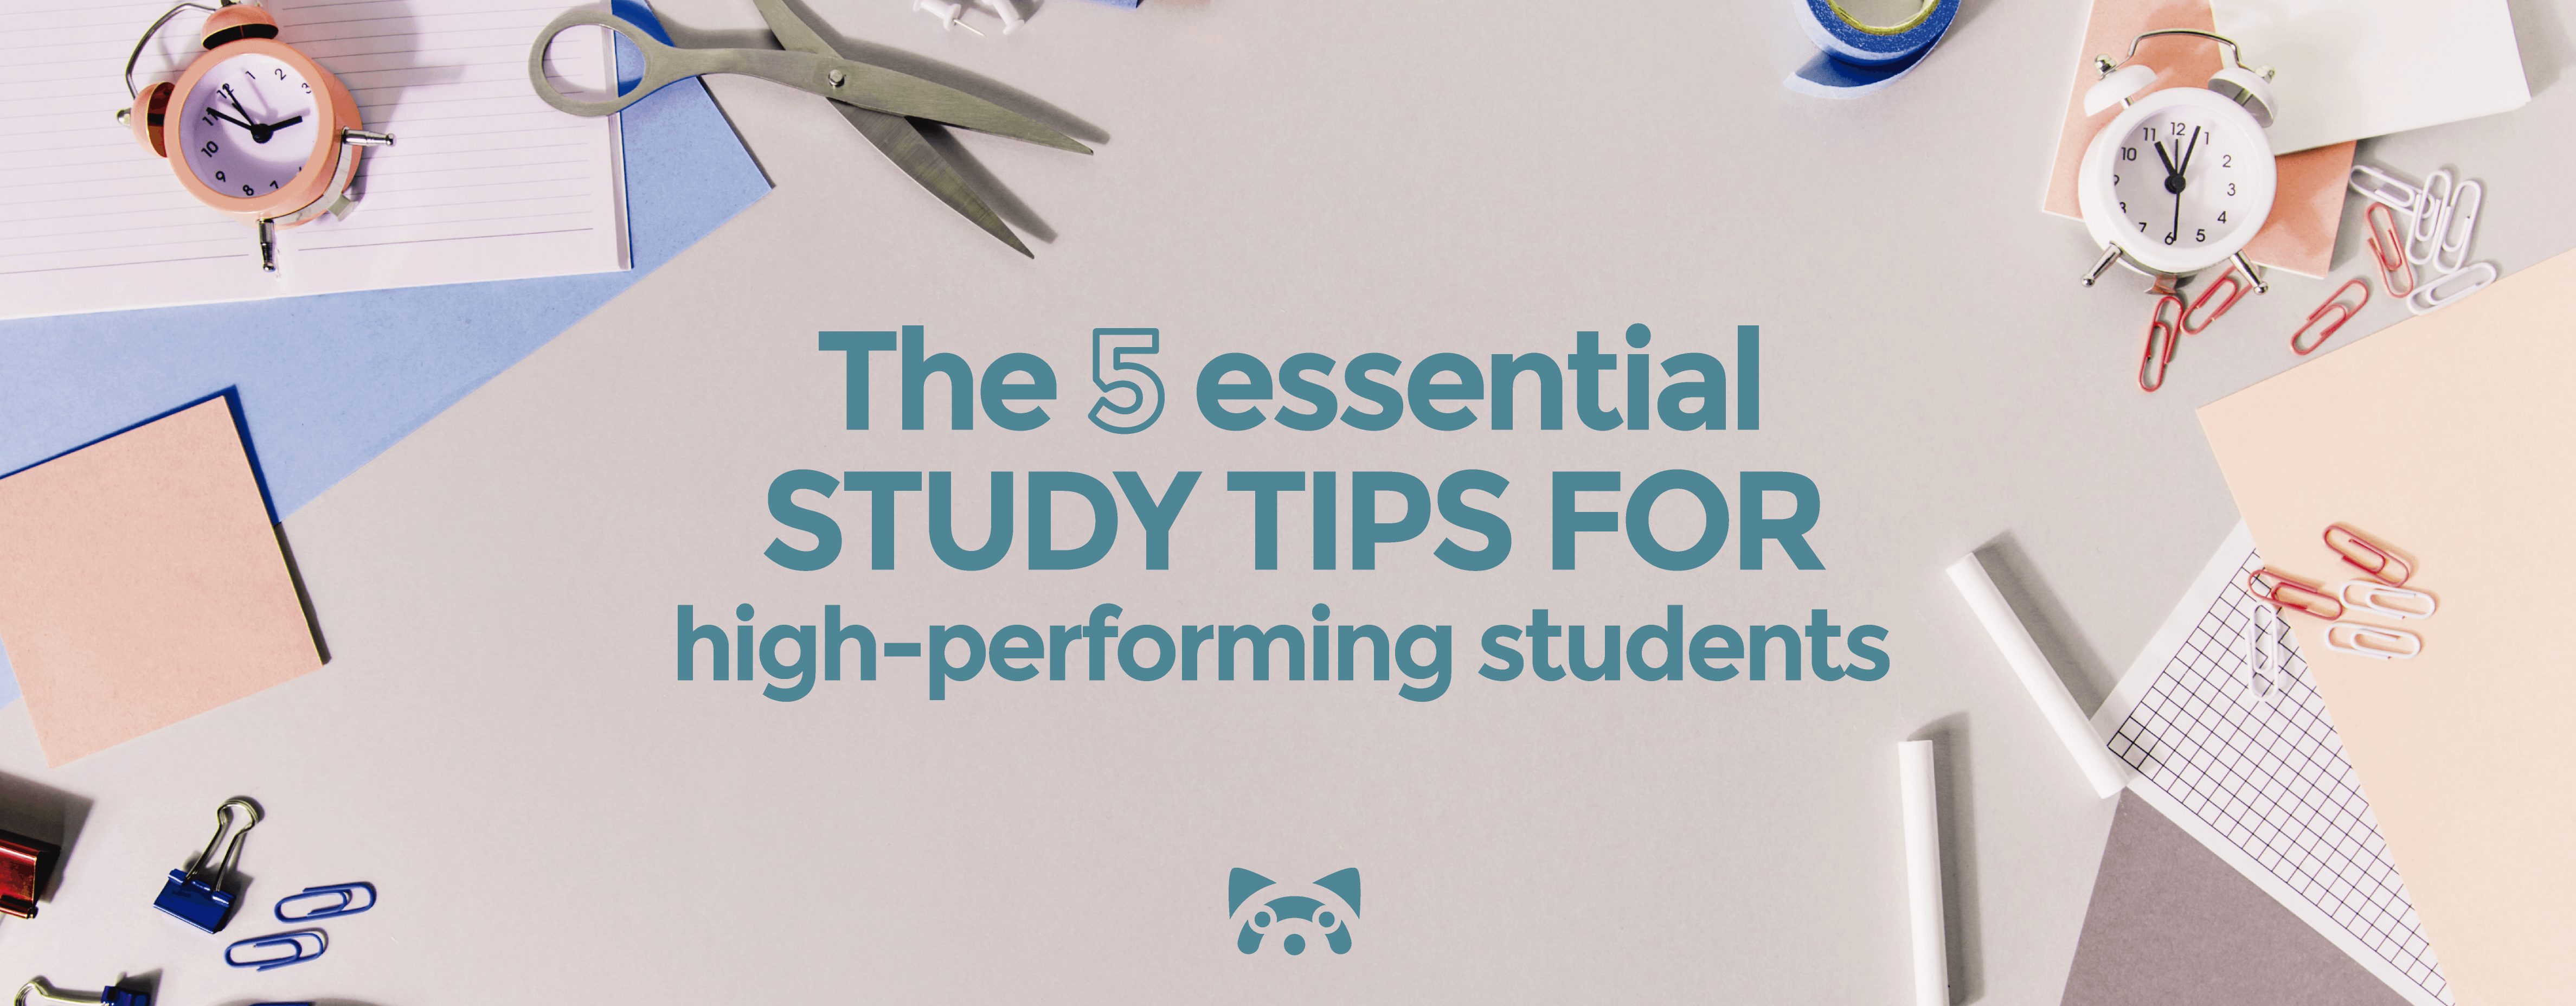 The 5 Essential Study Tips For High-Performing Students